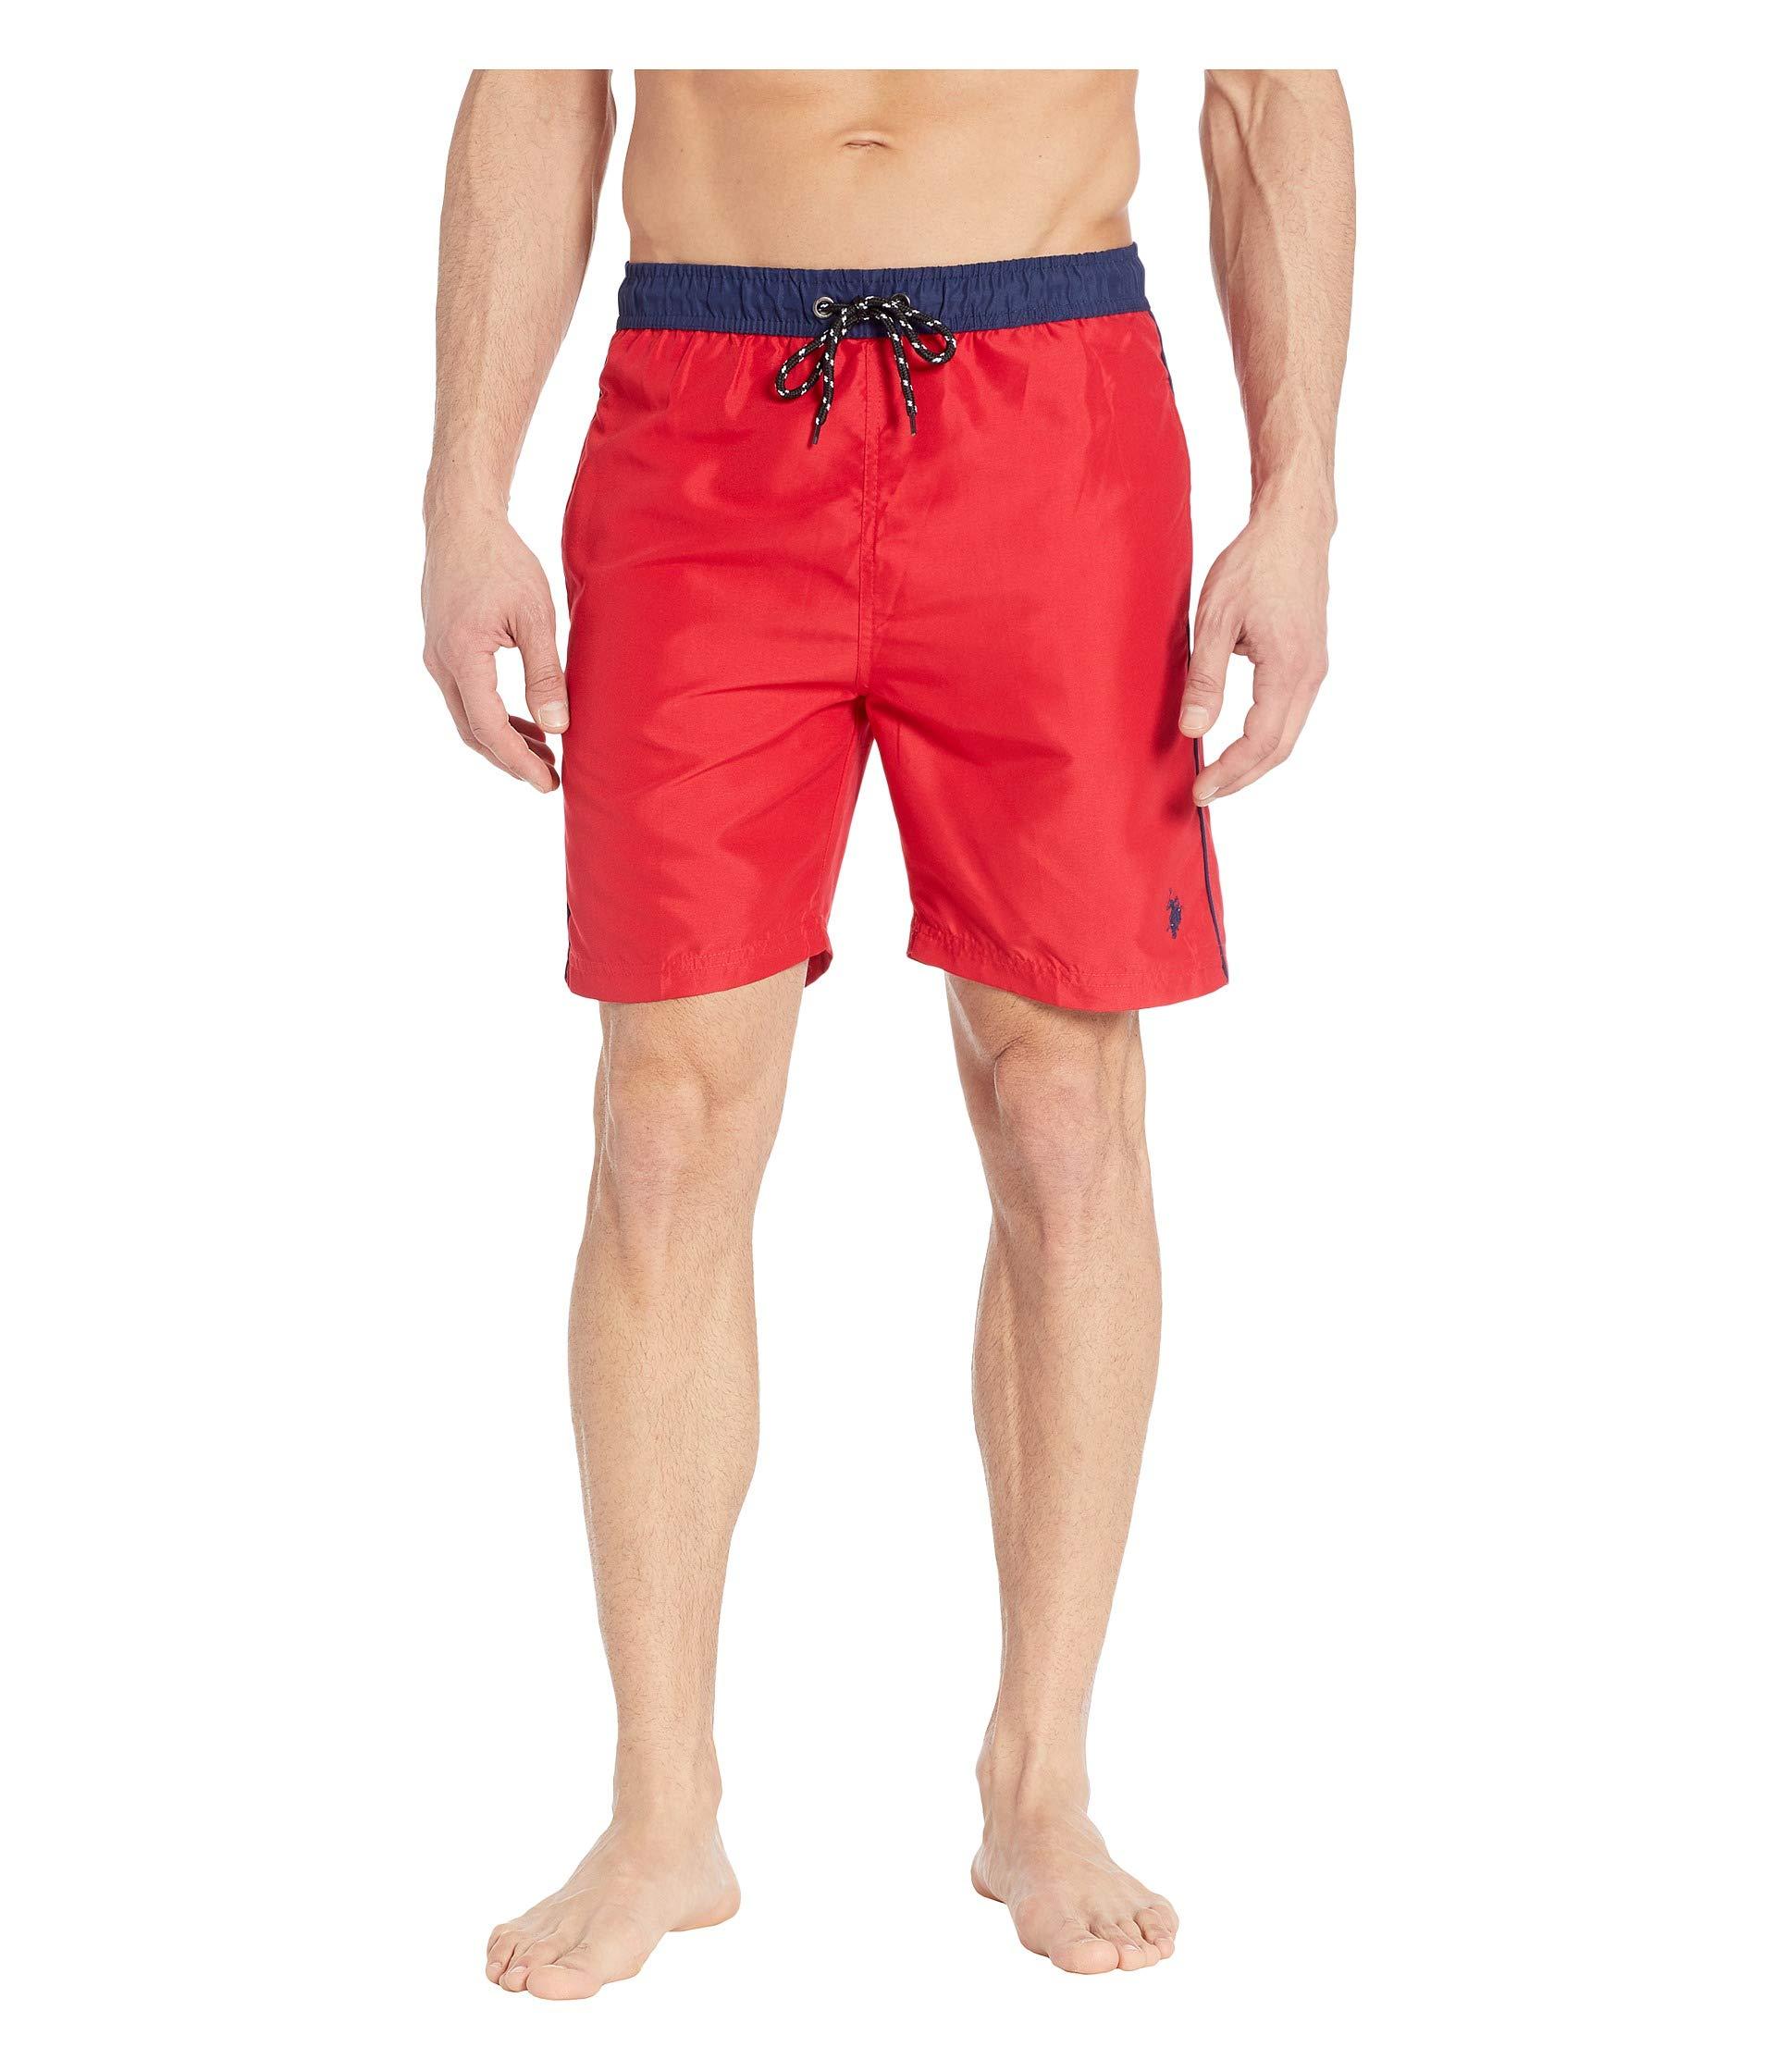 Lyst - U.S. POLO ASSN. Contrast Waistband Swim Shorts in Red for Men